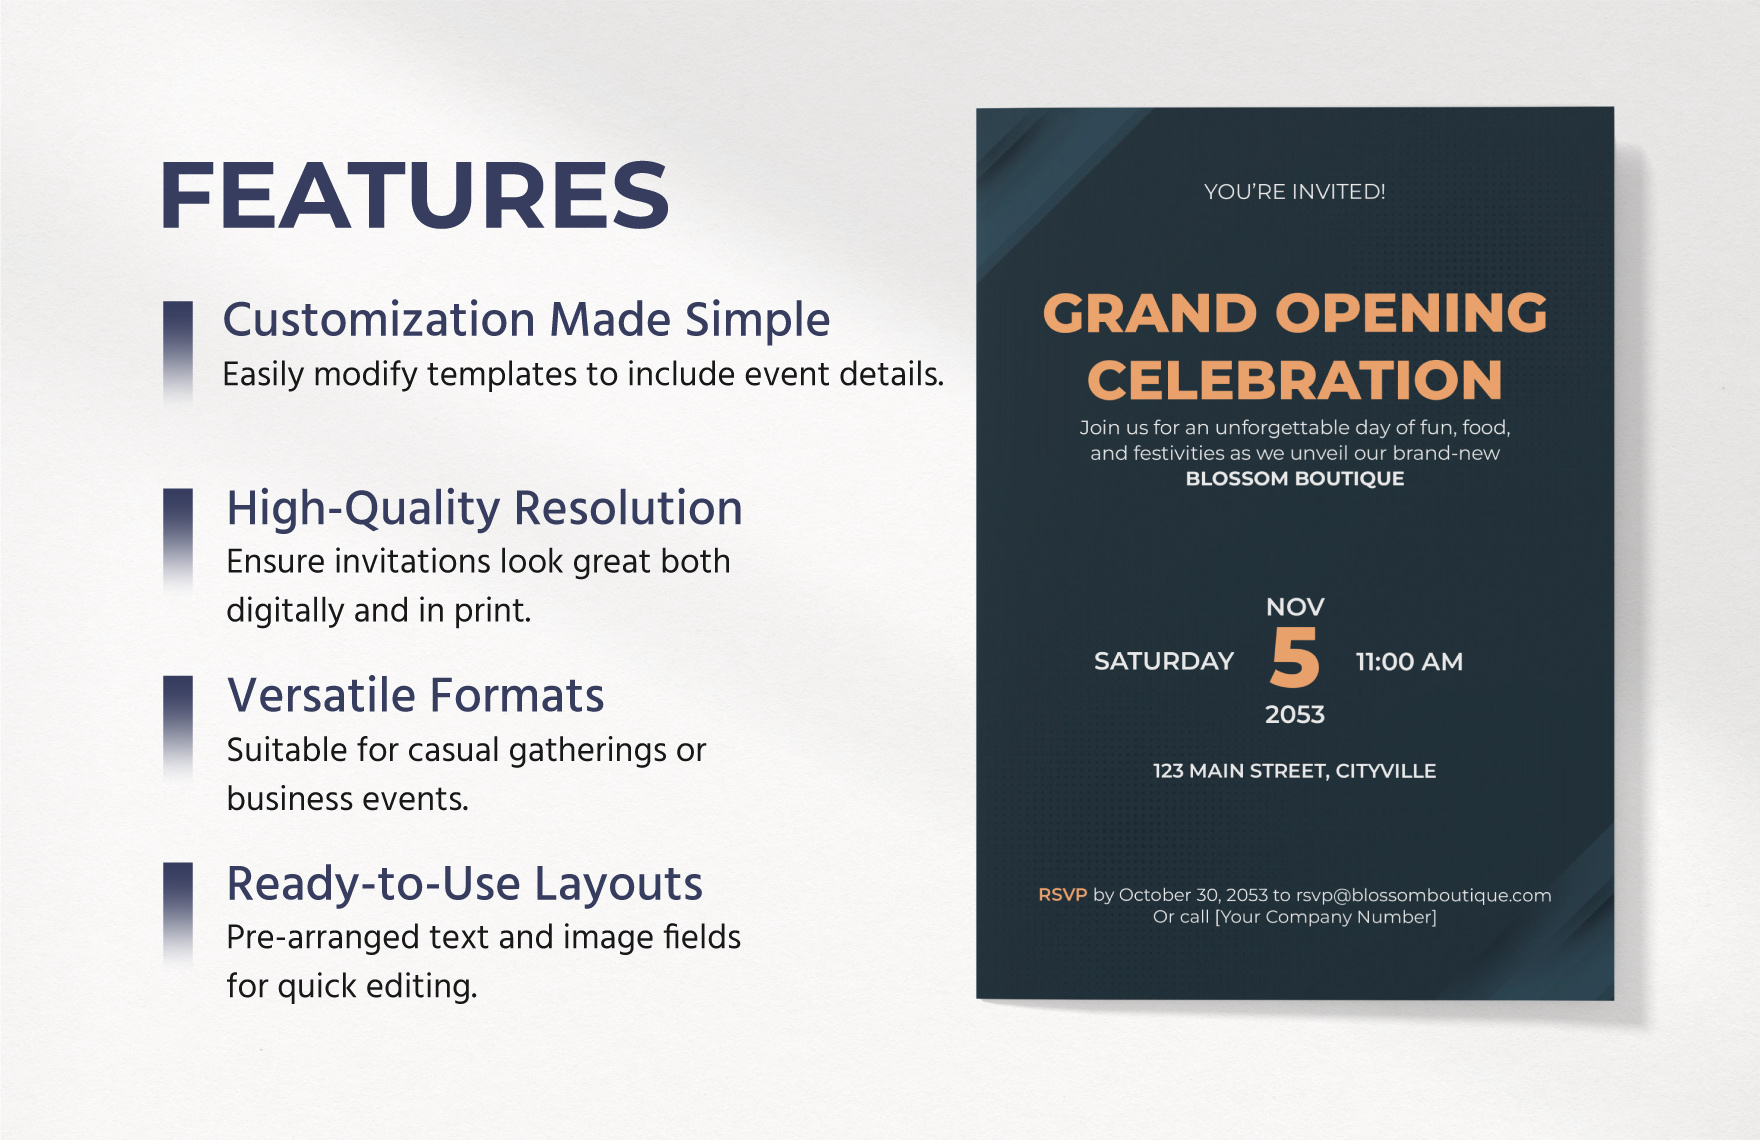 Grand Opening Event Invitation Card Template